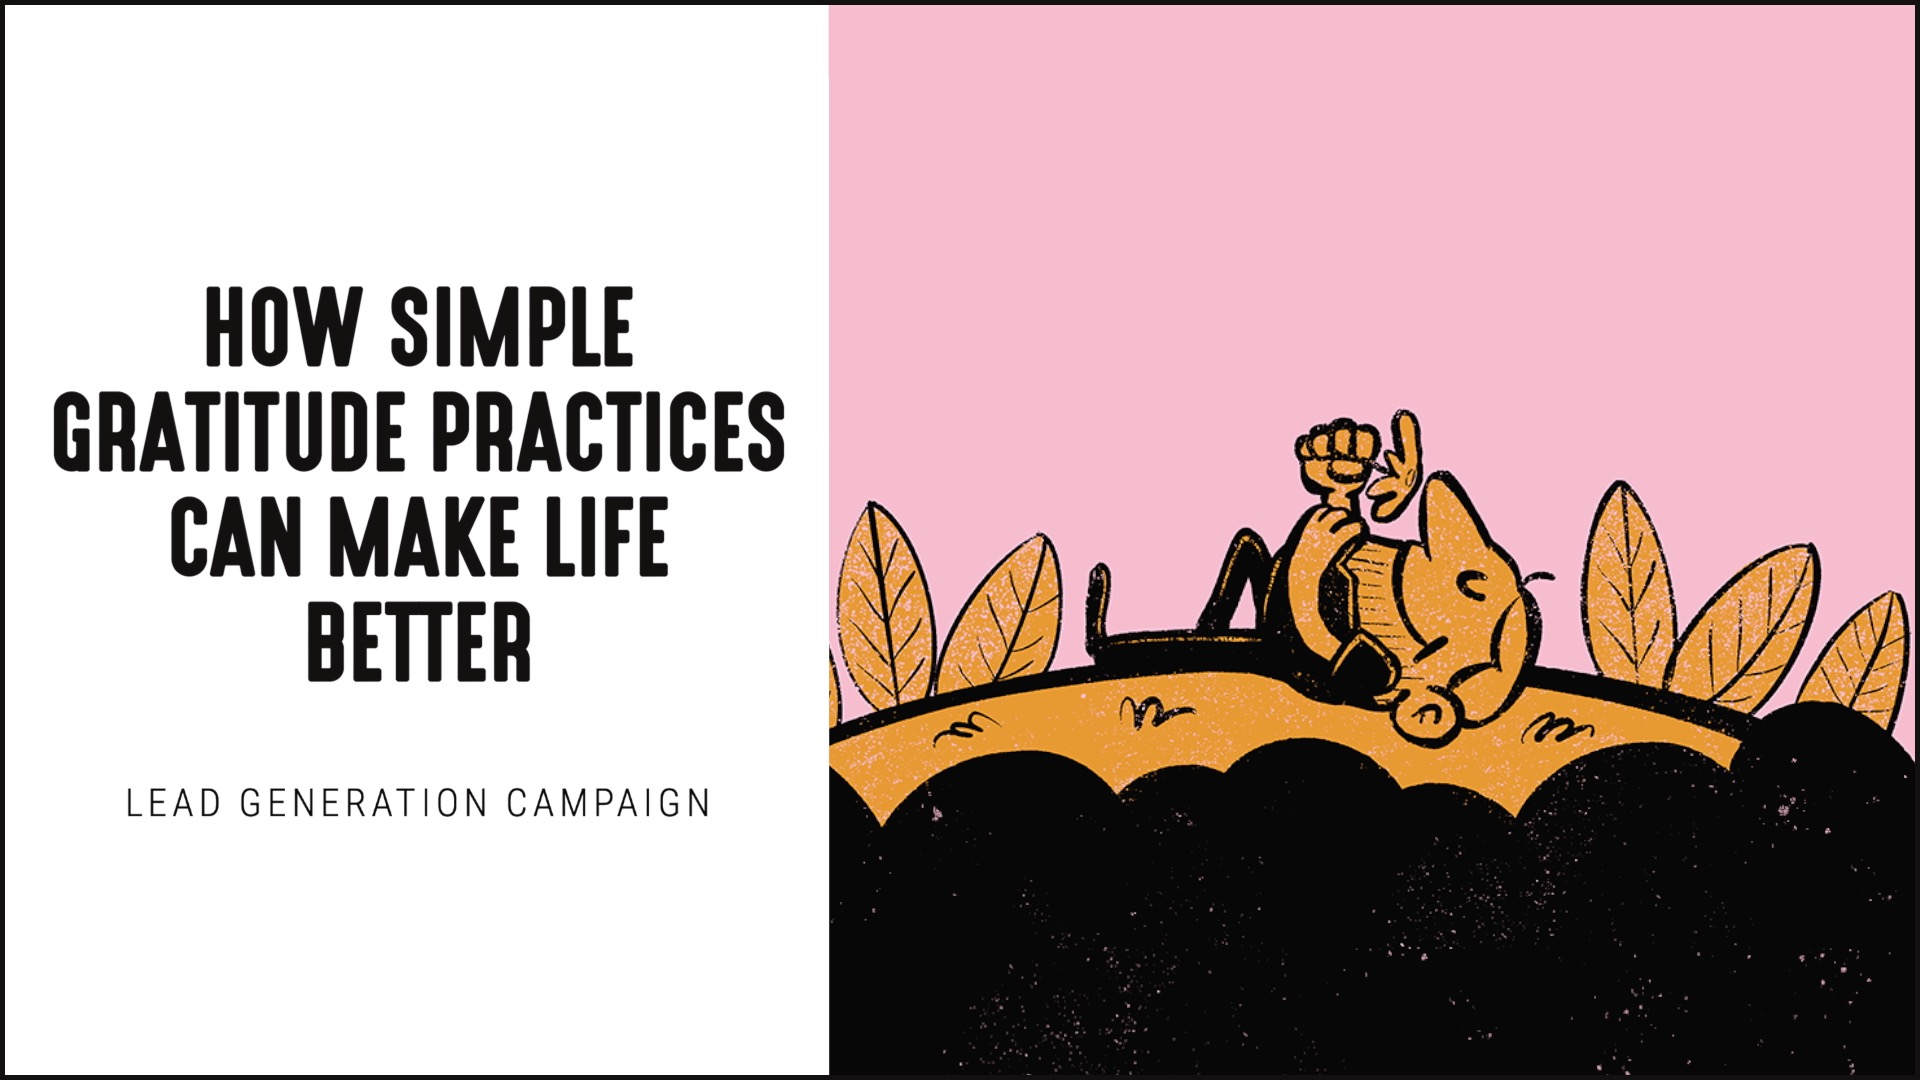 [NEW] Simple Gratitude Practices Can Make Life Better - Visual Insights Newsletter